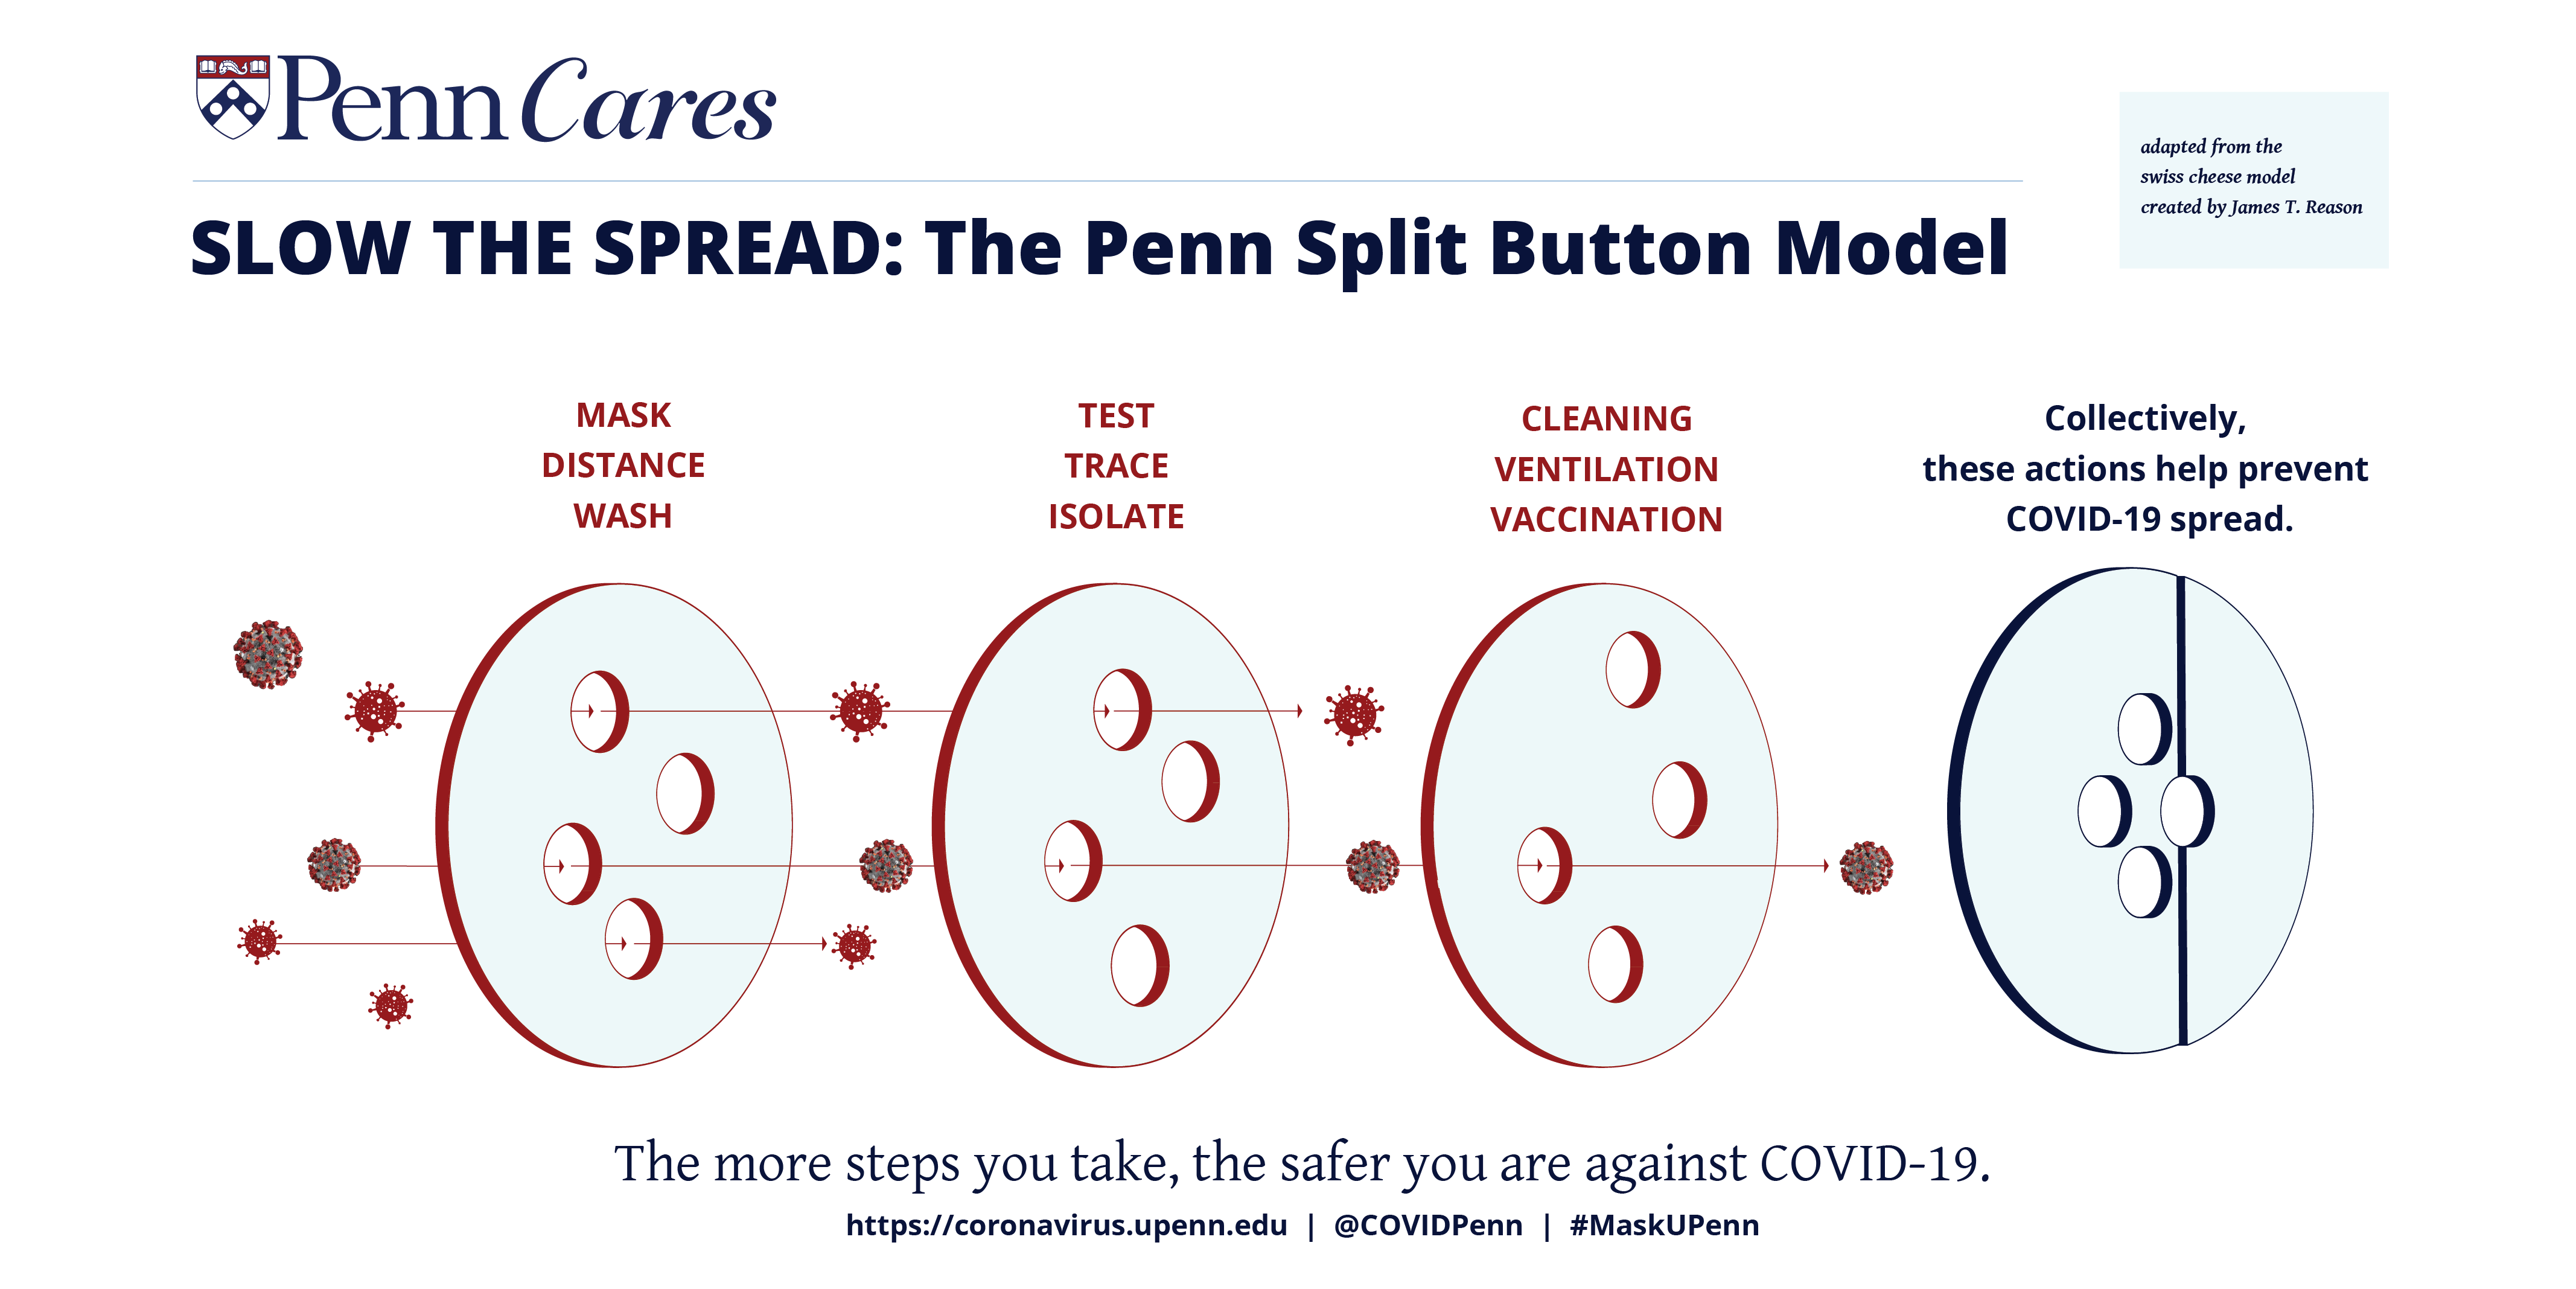 a diagram showing multiple buttons with slow the spread the pen split button model on the top, with different buttons representing mask distance wash, test trace isolate, cleaning ventillation and vaccination, then the last one reads collectively these actions help prevent COVID-19 spread, at the bottom text reads the more steps you take, the safer you are against covid-19